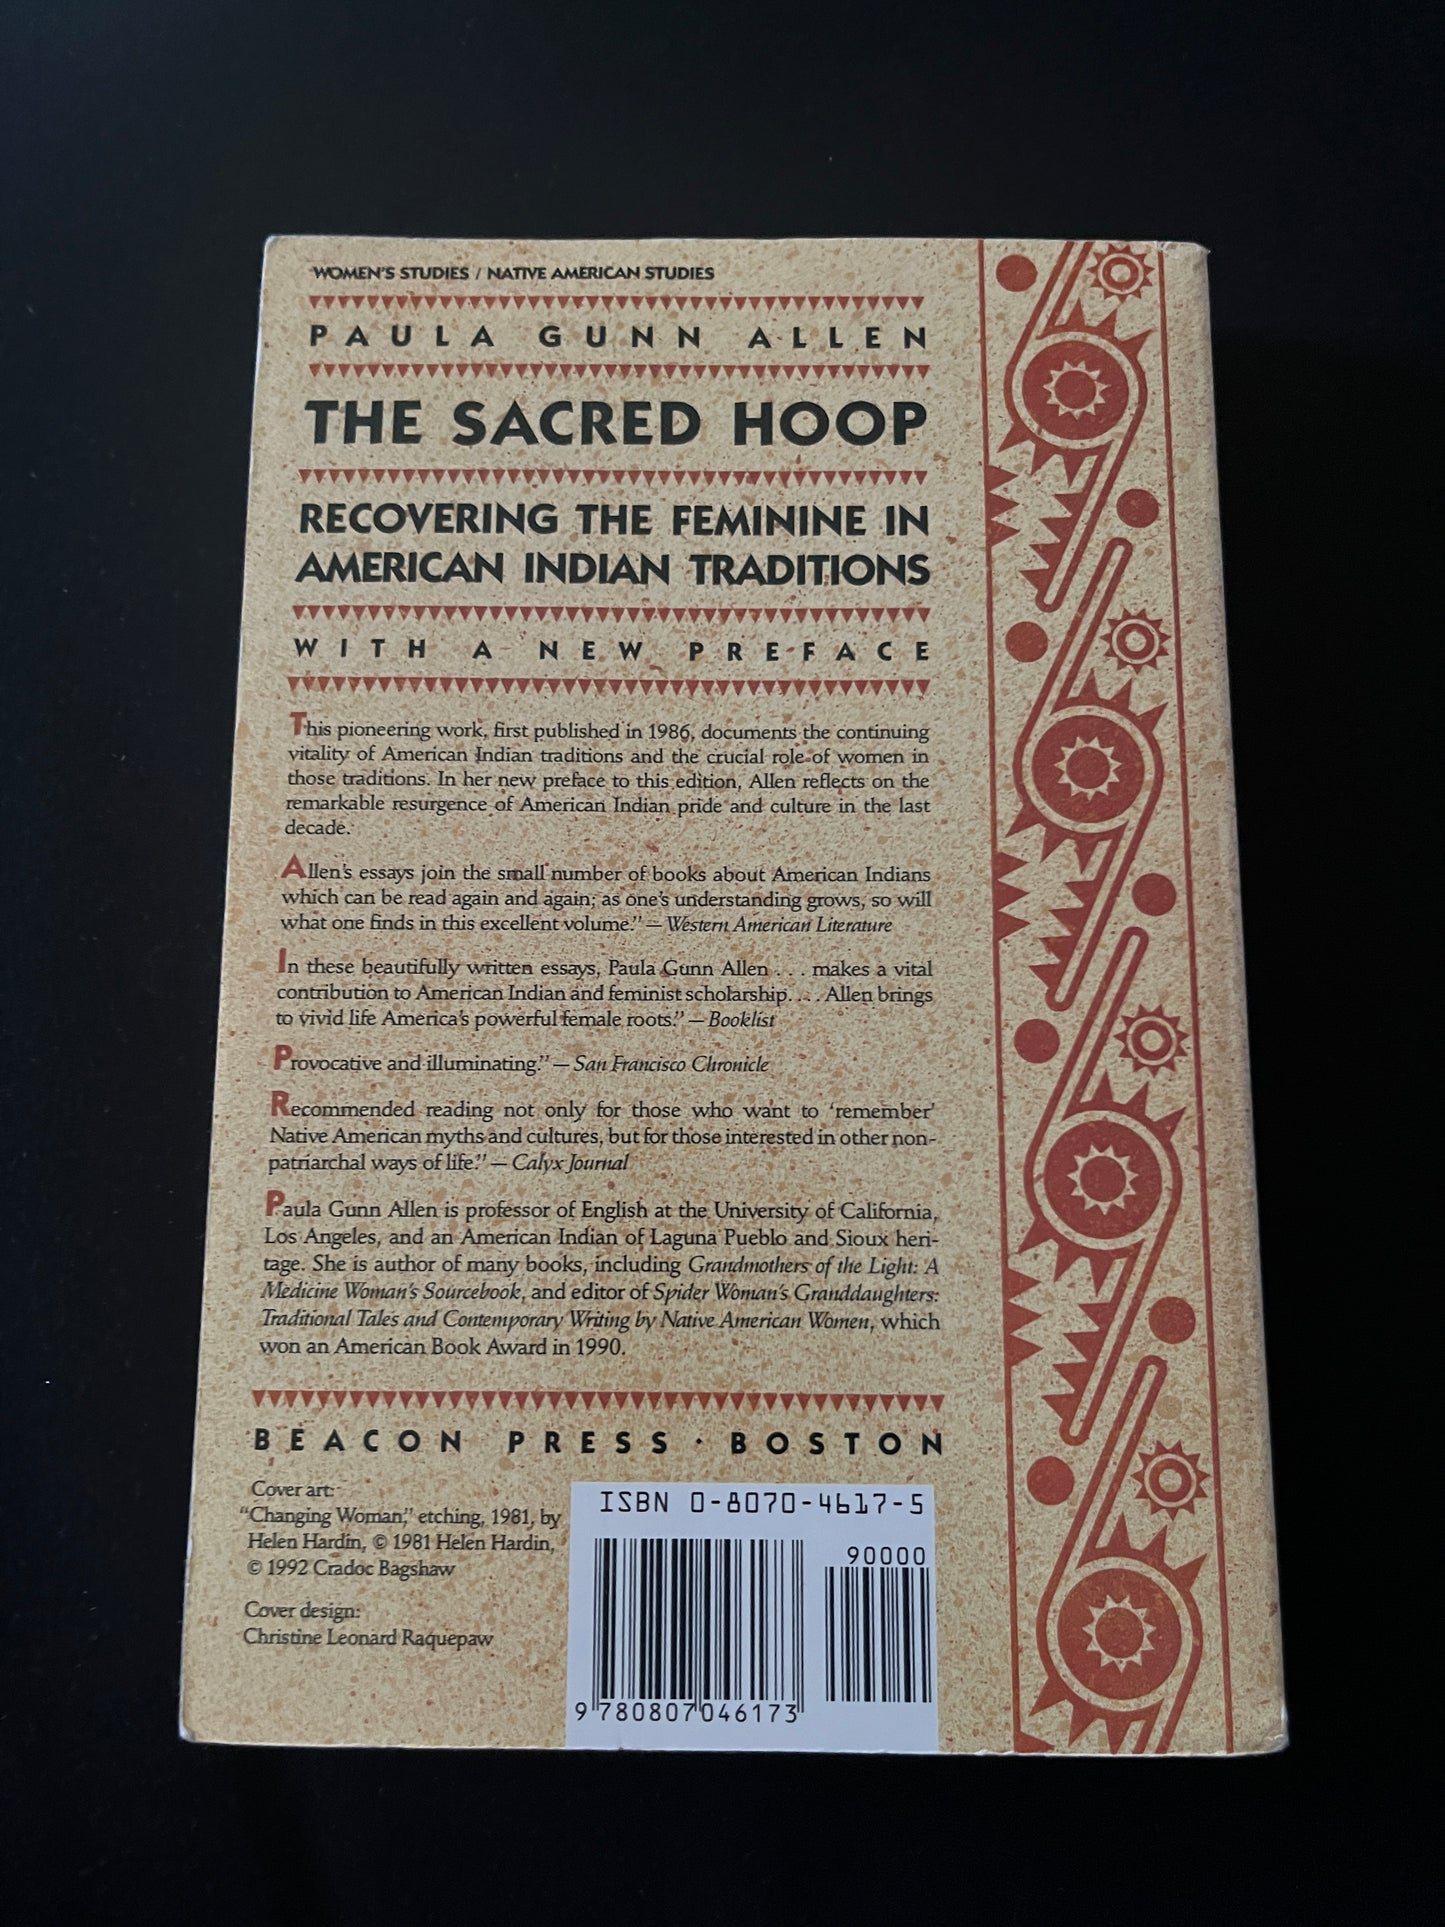 THE SACRED HOOP: Recovering the Feminine in American Indian Traditions by Paula Gunn Allen